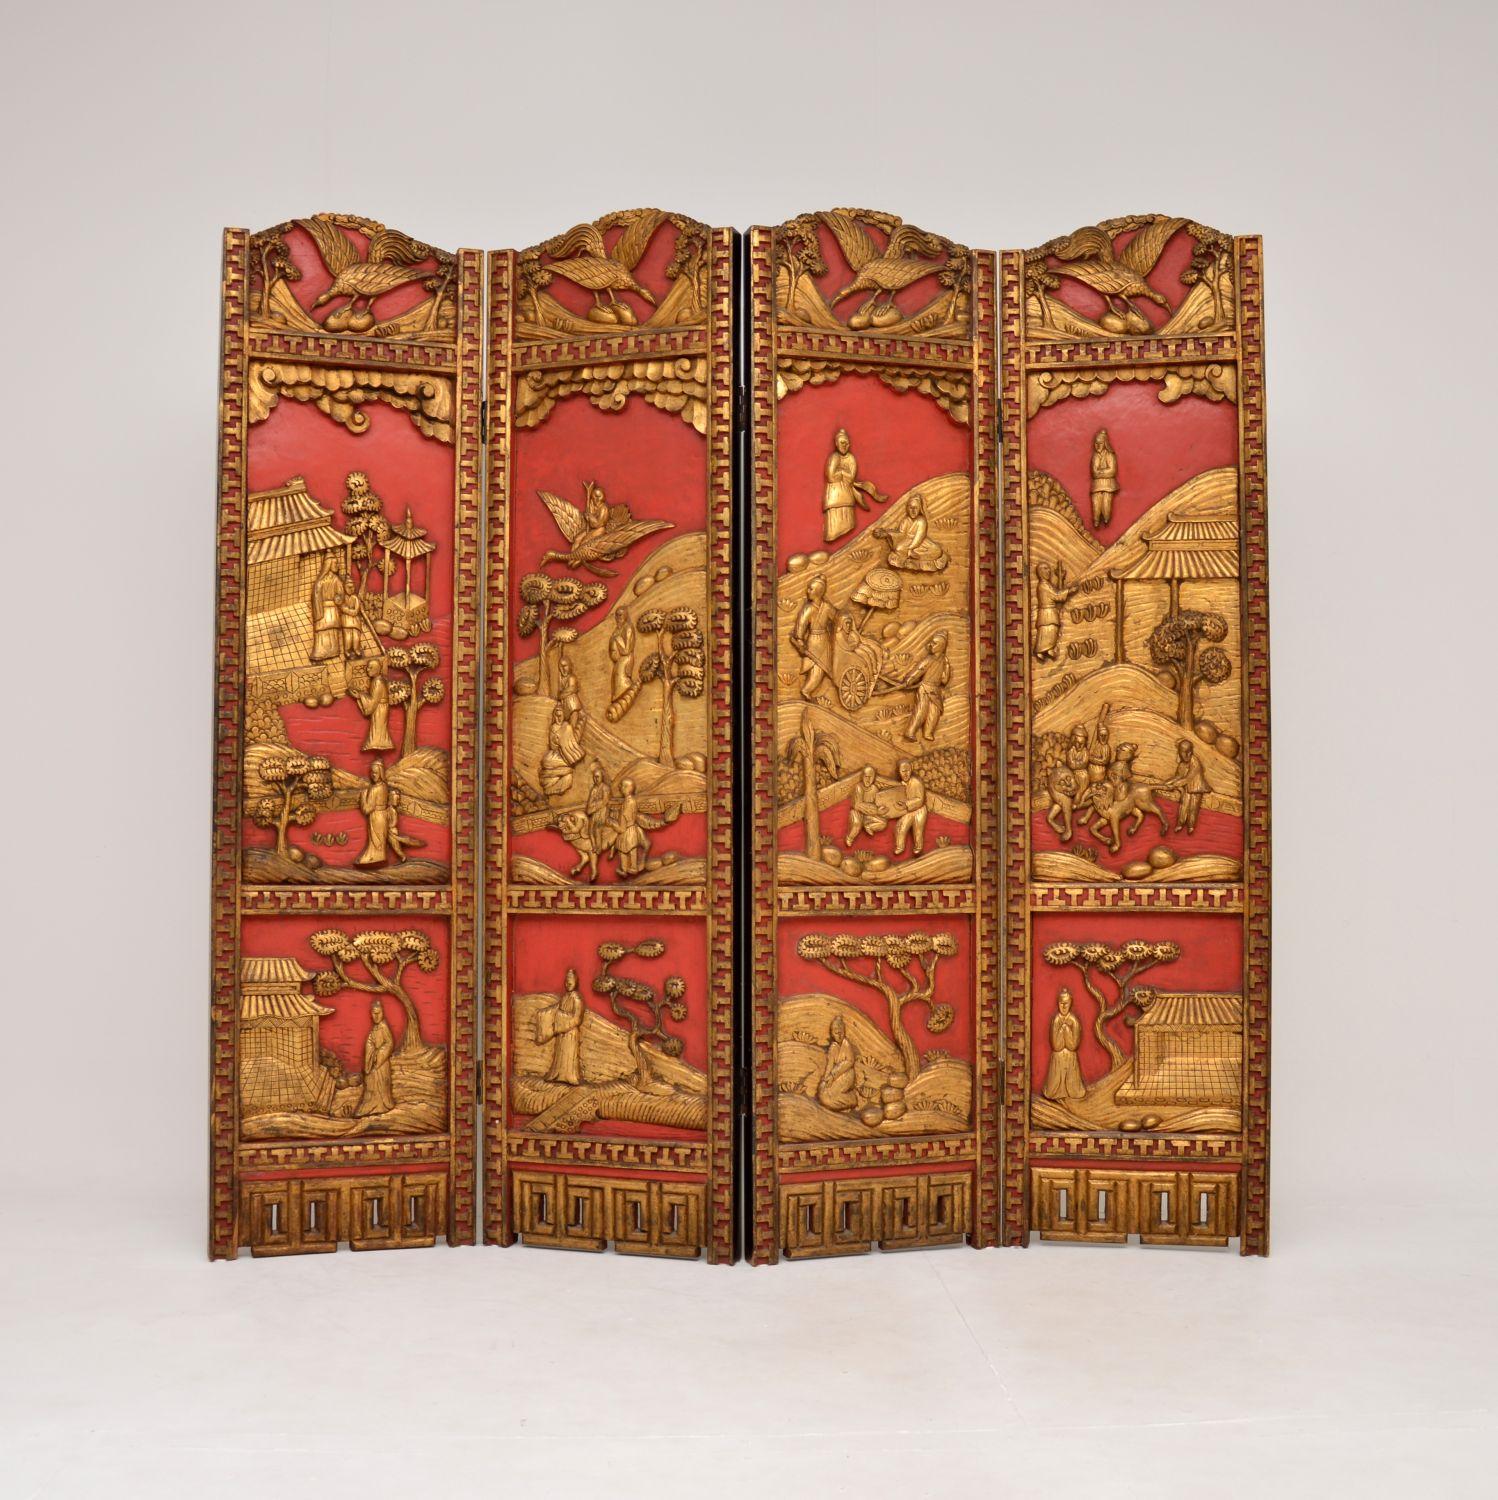 A stunning antique lacquered & gilt oriental folding screen / room divider in carved lacquered & gilded wood. This was made in East Asia, possibly China or Japan, it dates from the early 20th century around 1900-1920, or possibly a bit earlier.

It